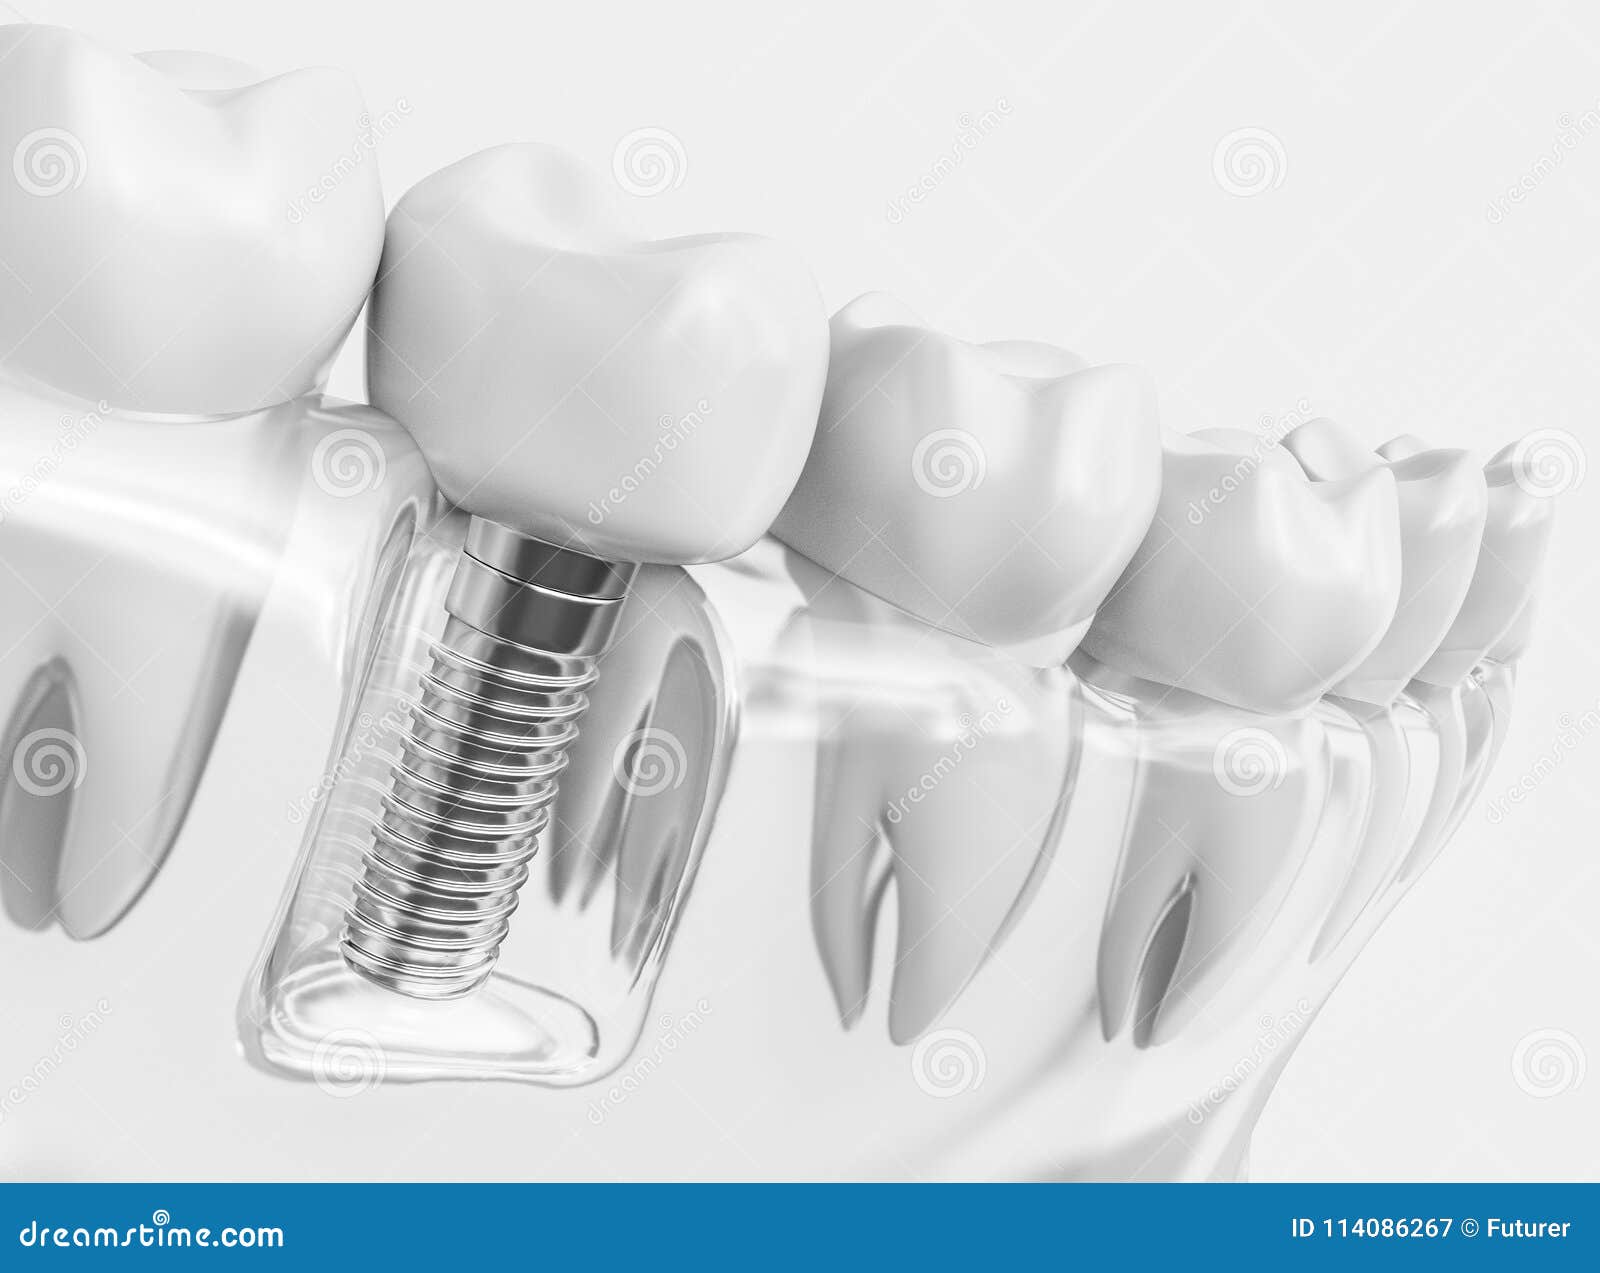 tooth human implant - 3d rendering